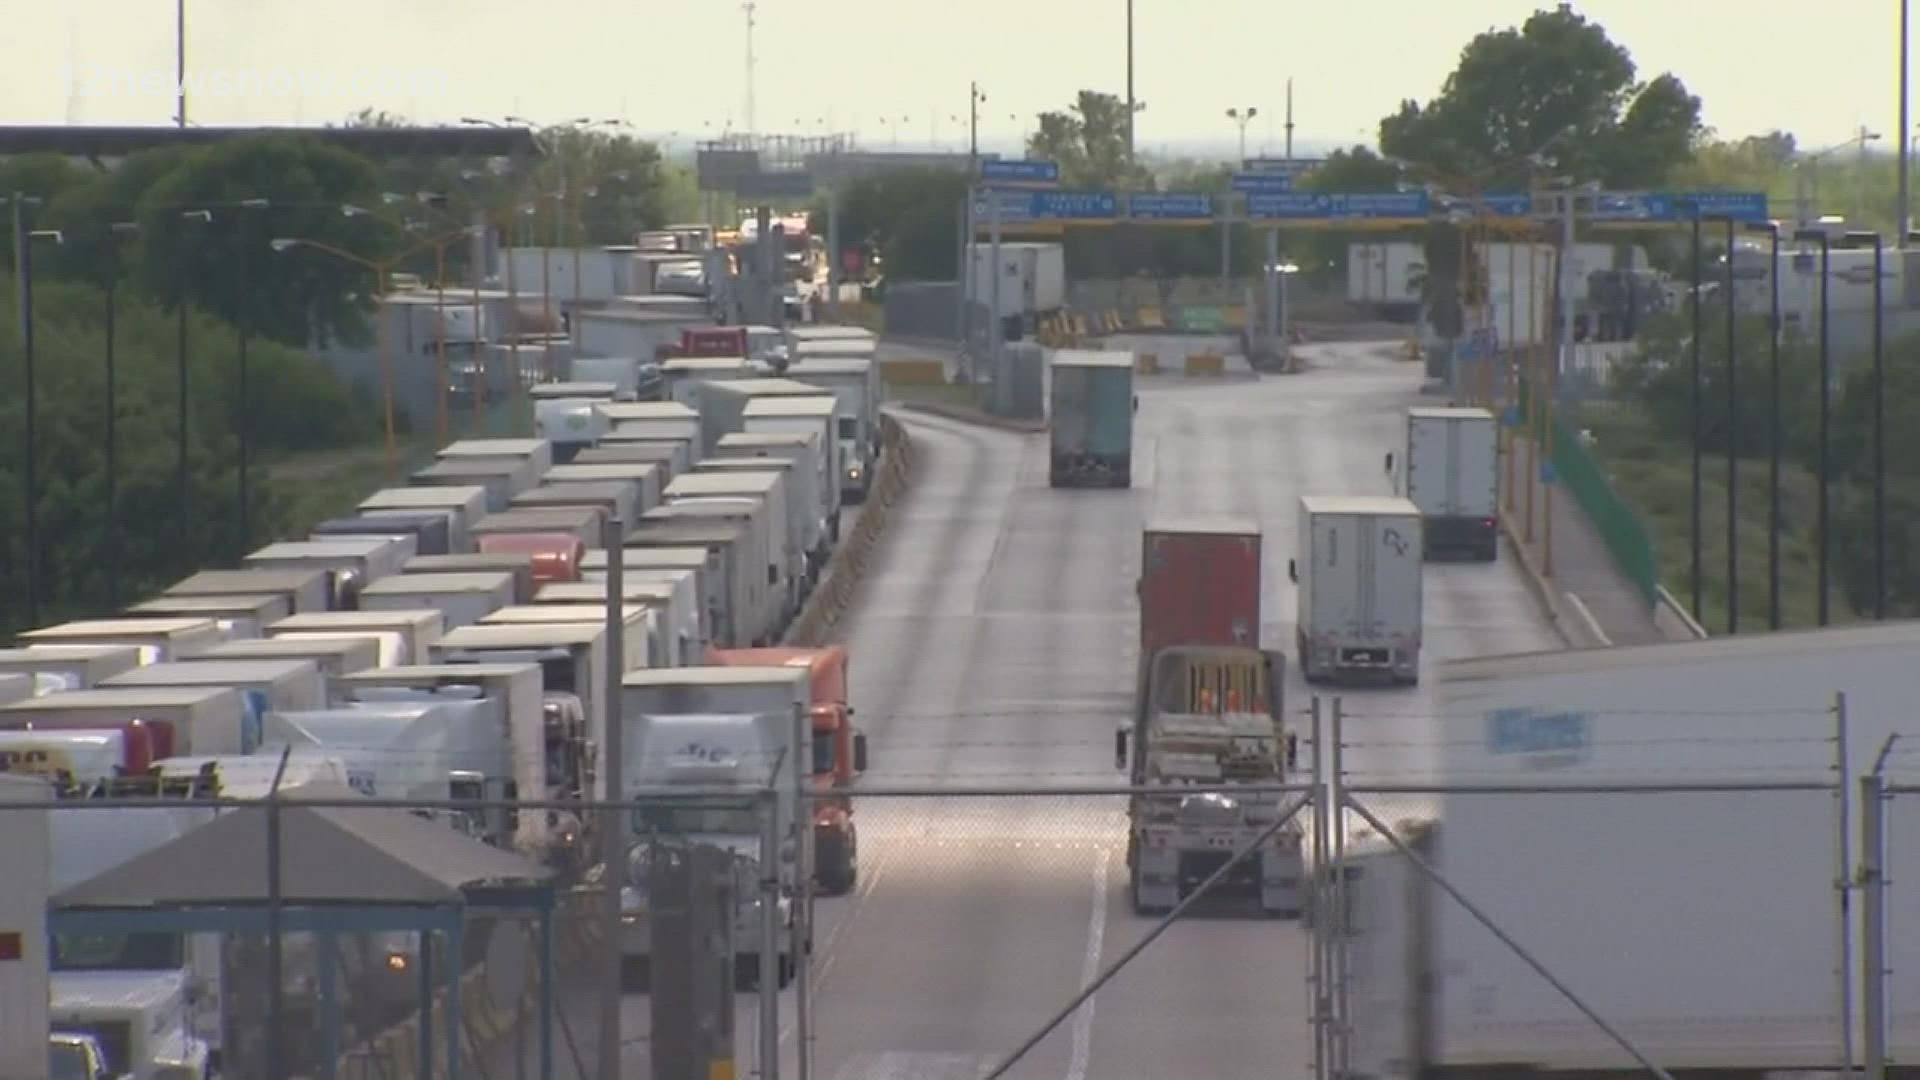 As of last week, state troopers are now inspecting all trucks as they cross from Mexico into Texas.